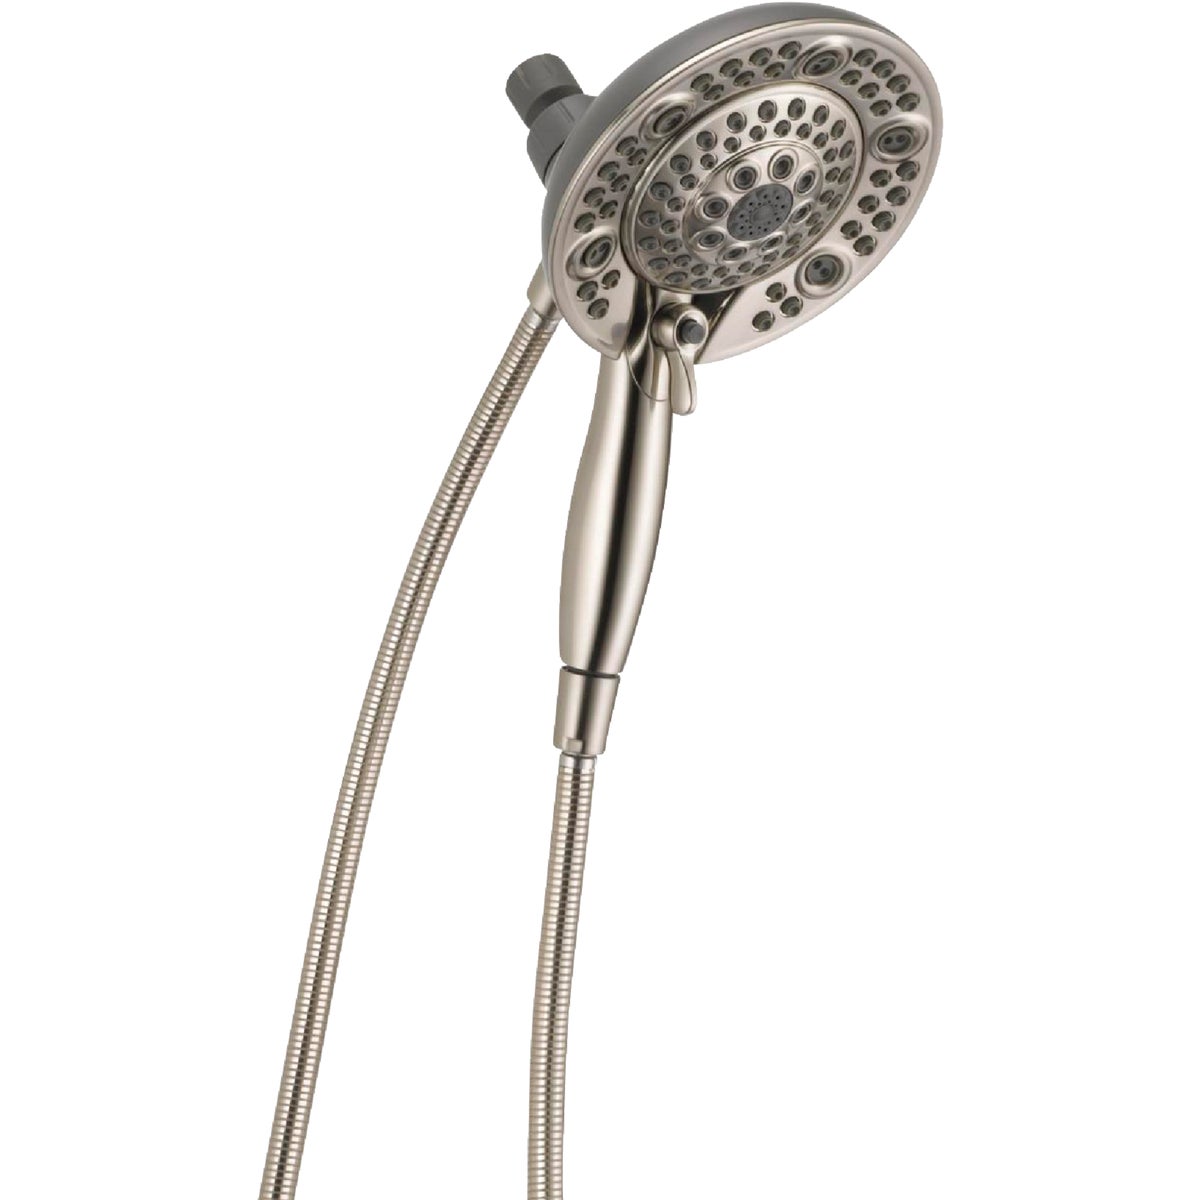 Delta In2ition 5-Spray 1.75 GPM Two-in-One Combo Handheld Shower and Showerhead, Brushed Nickel